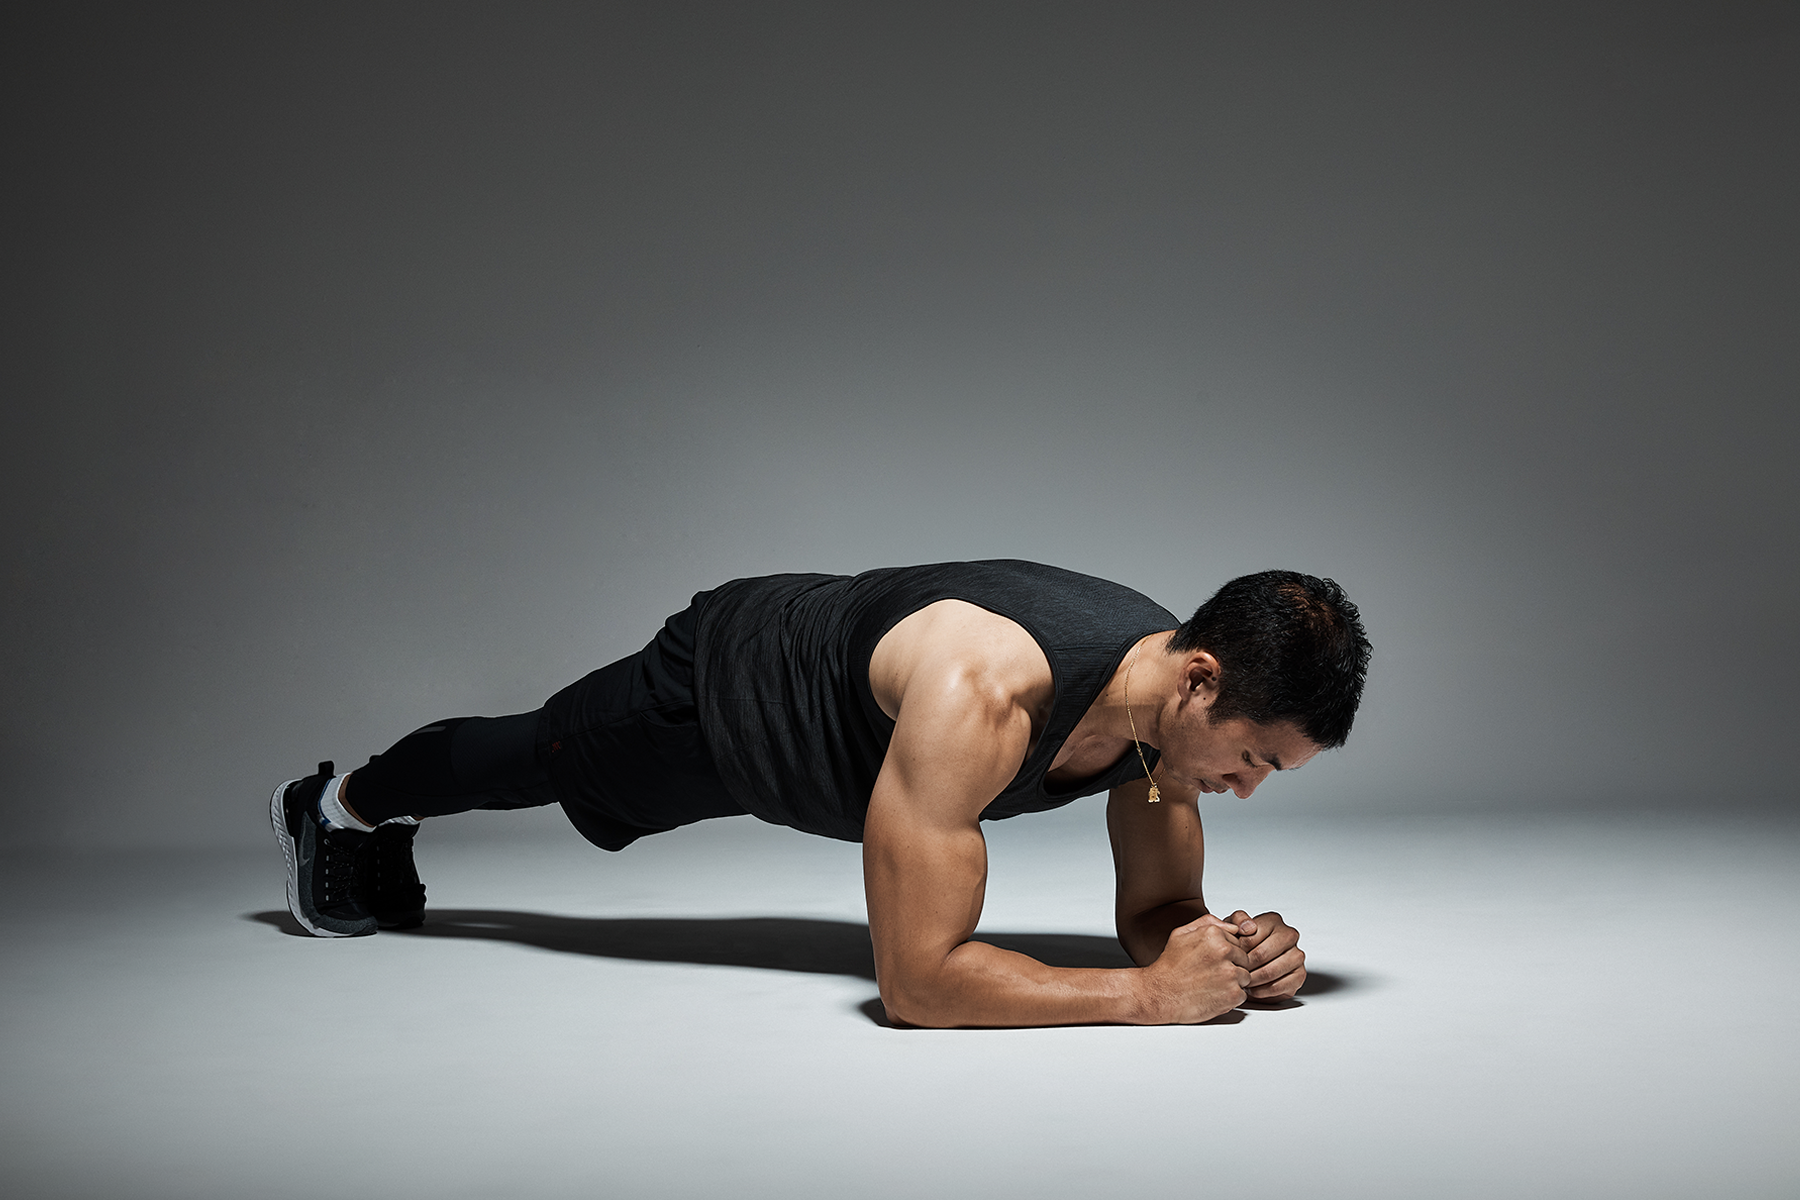 Show Plank Exercise Discount Sale, UP TO 69% OFF |  www.barcelonaopenbancsabadell.com